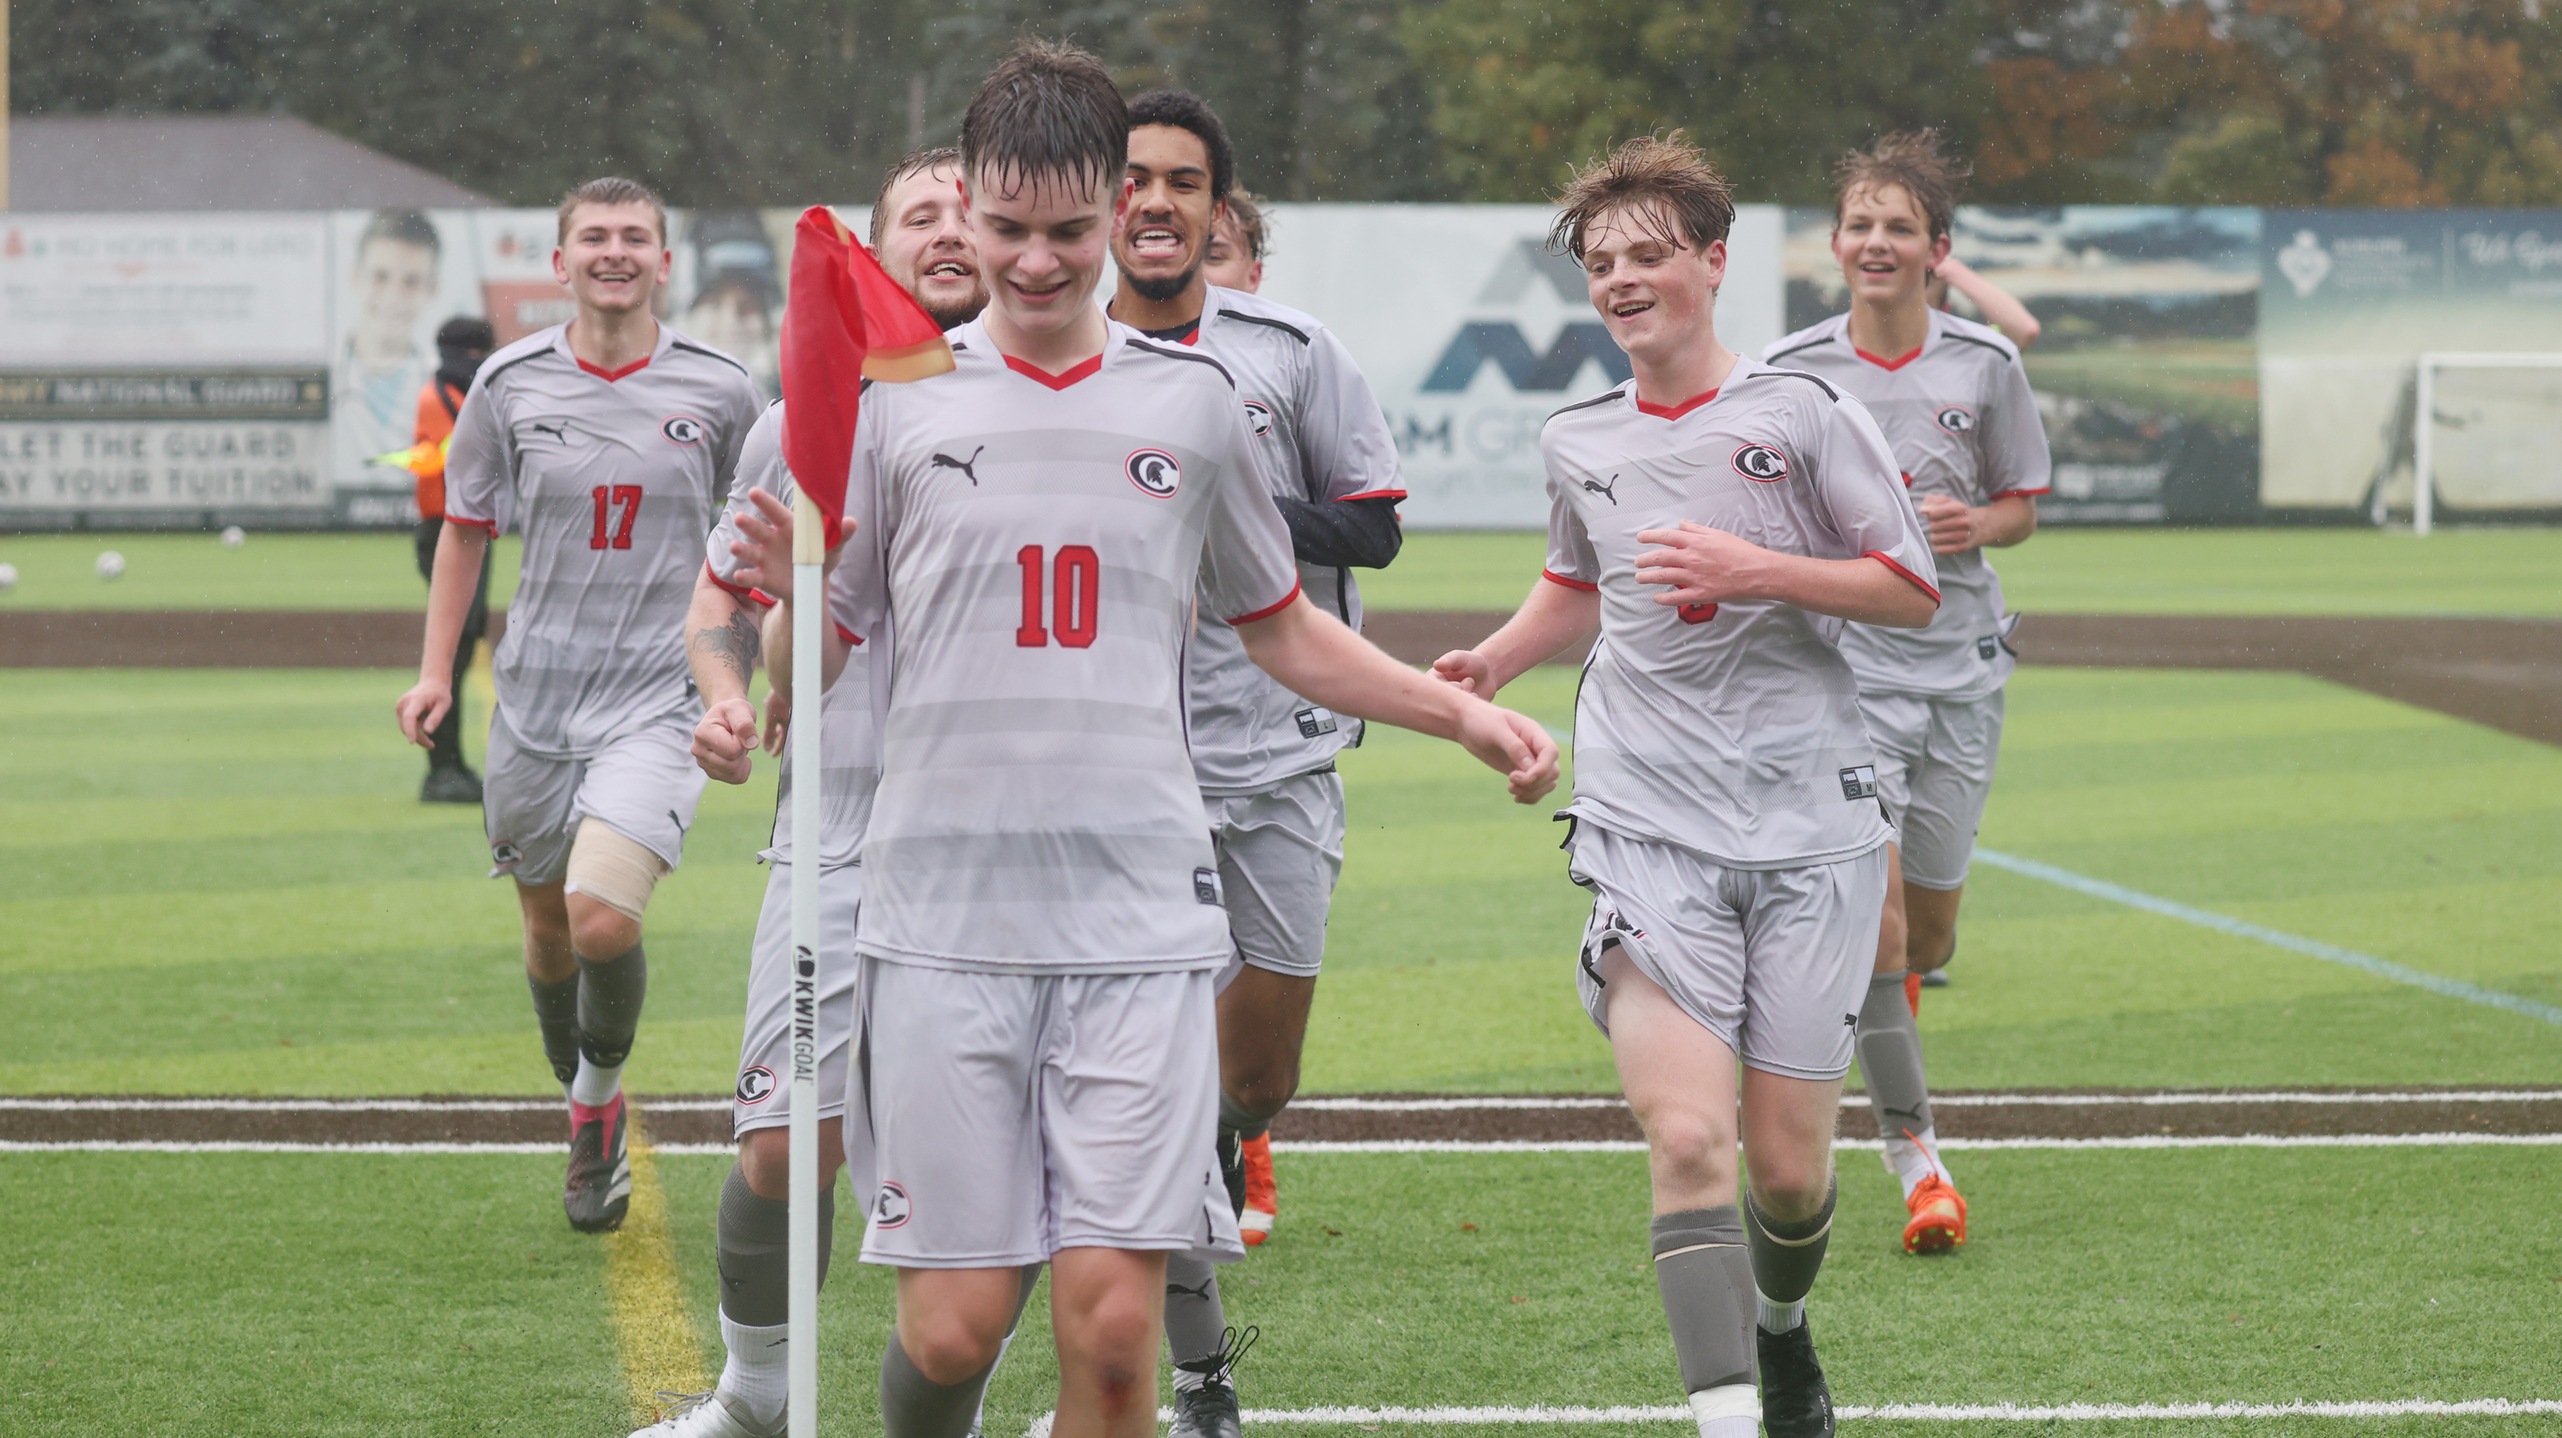 The Spartans celebrate Jake Botterill (#10)'s second goal of the first half in their 6-1 playoff win over Hudson Valley CC at Falcon Park on Sunday.